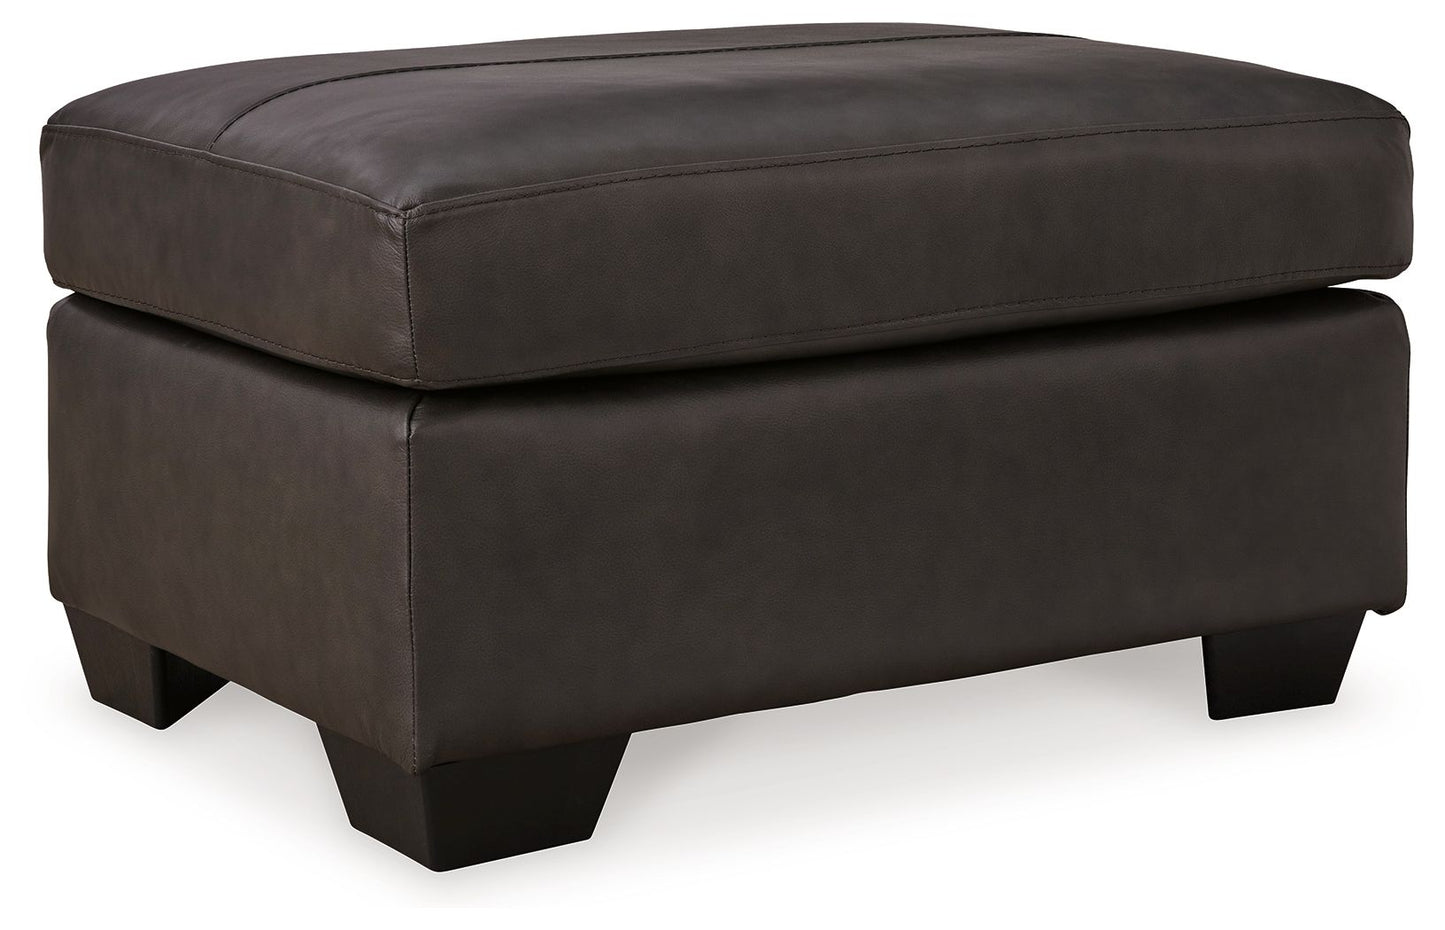 Belziani - Storm - 4 Pc. - Sofa, Loveseat, Chair And A Half, Ottoman